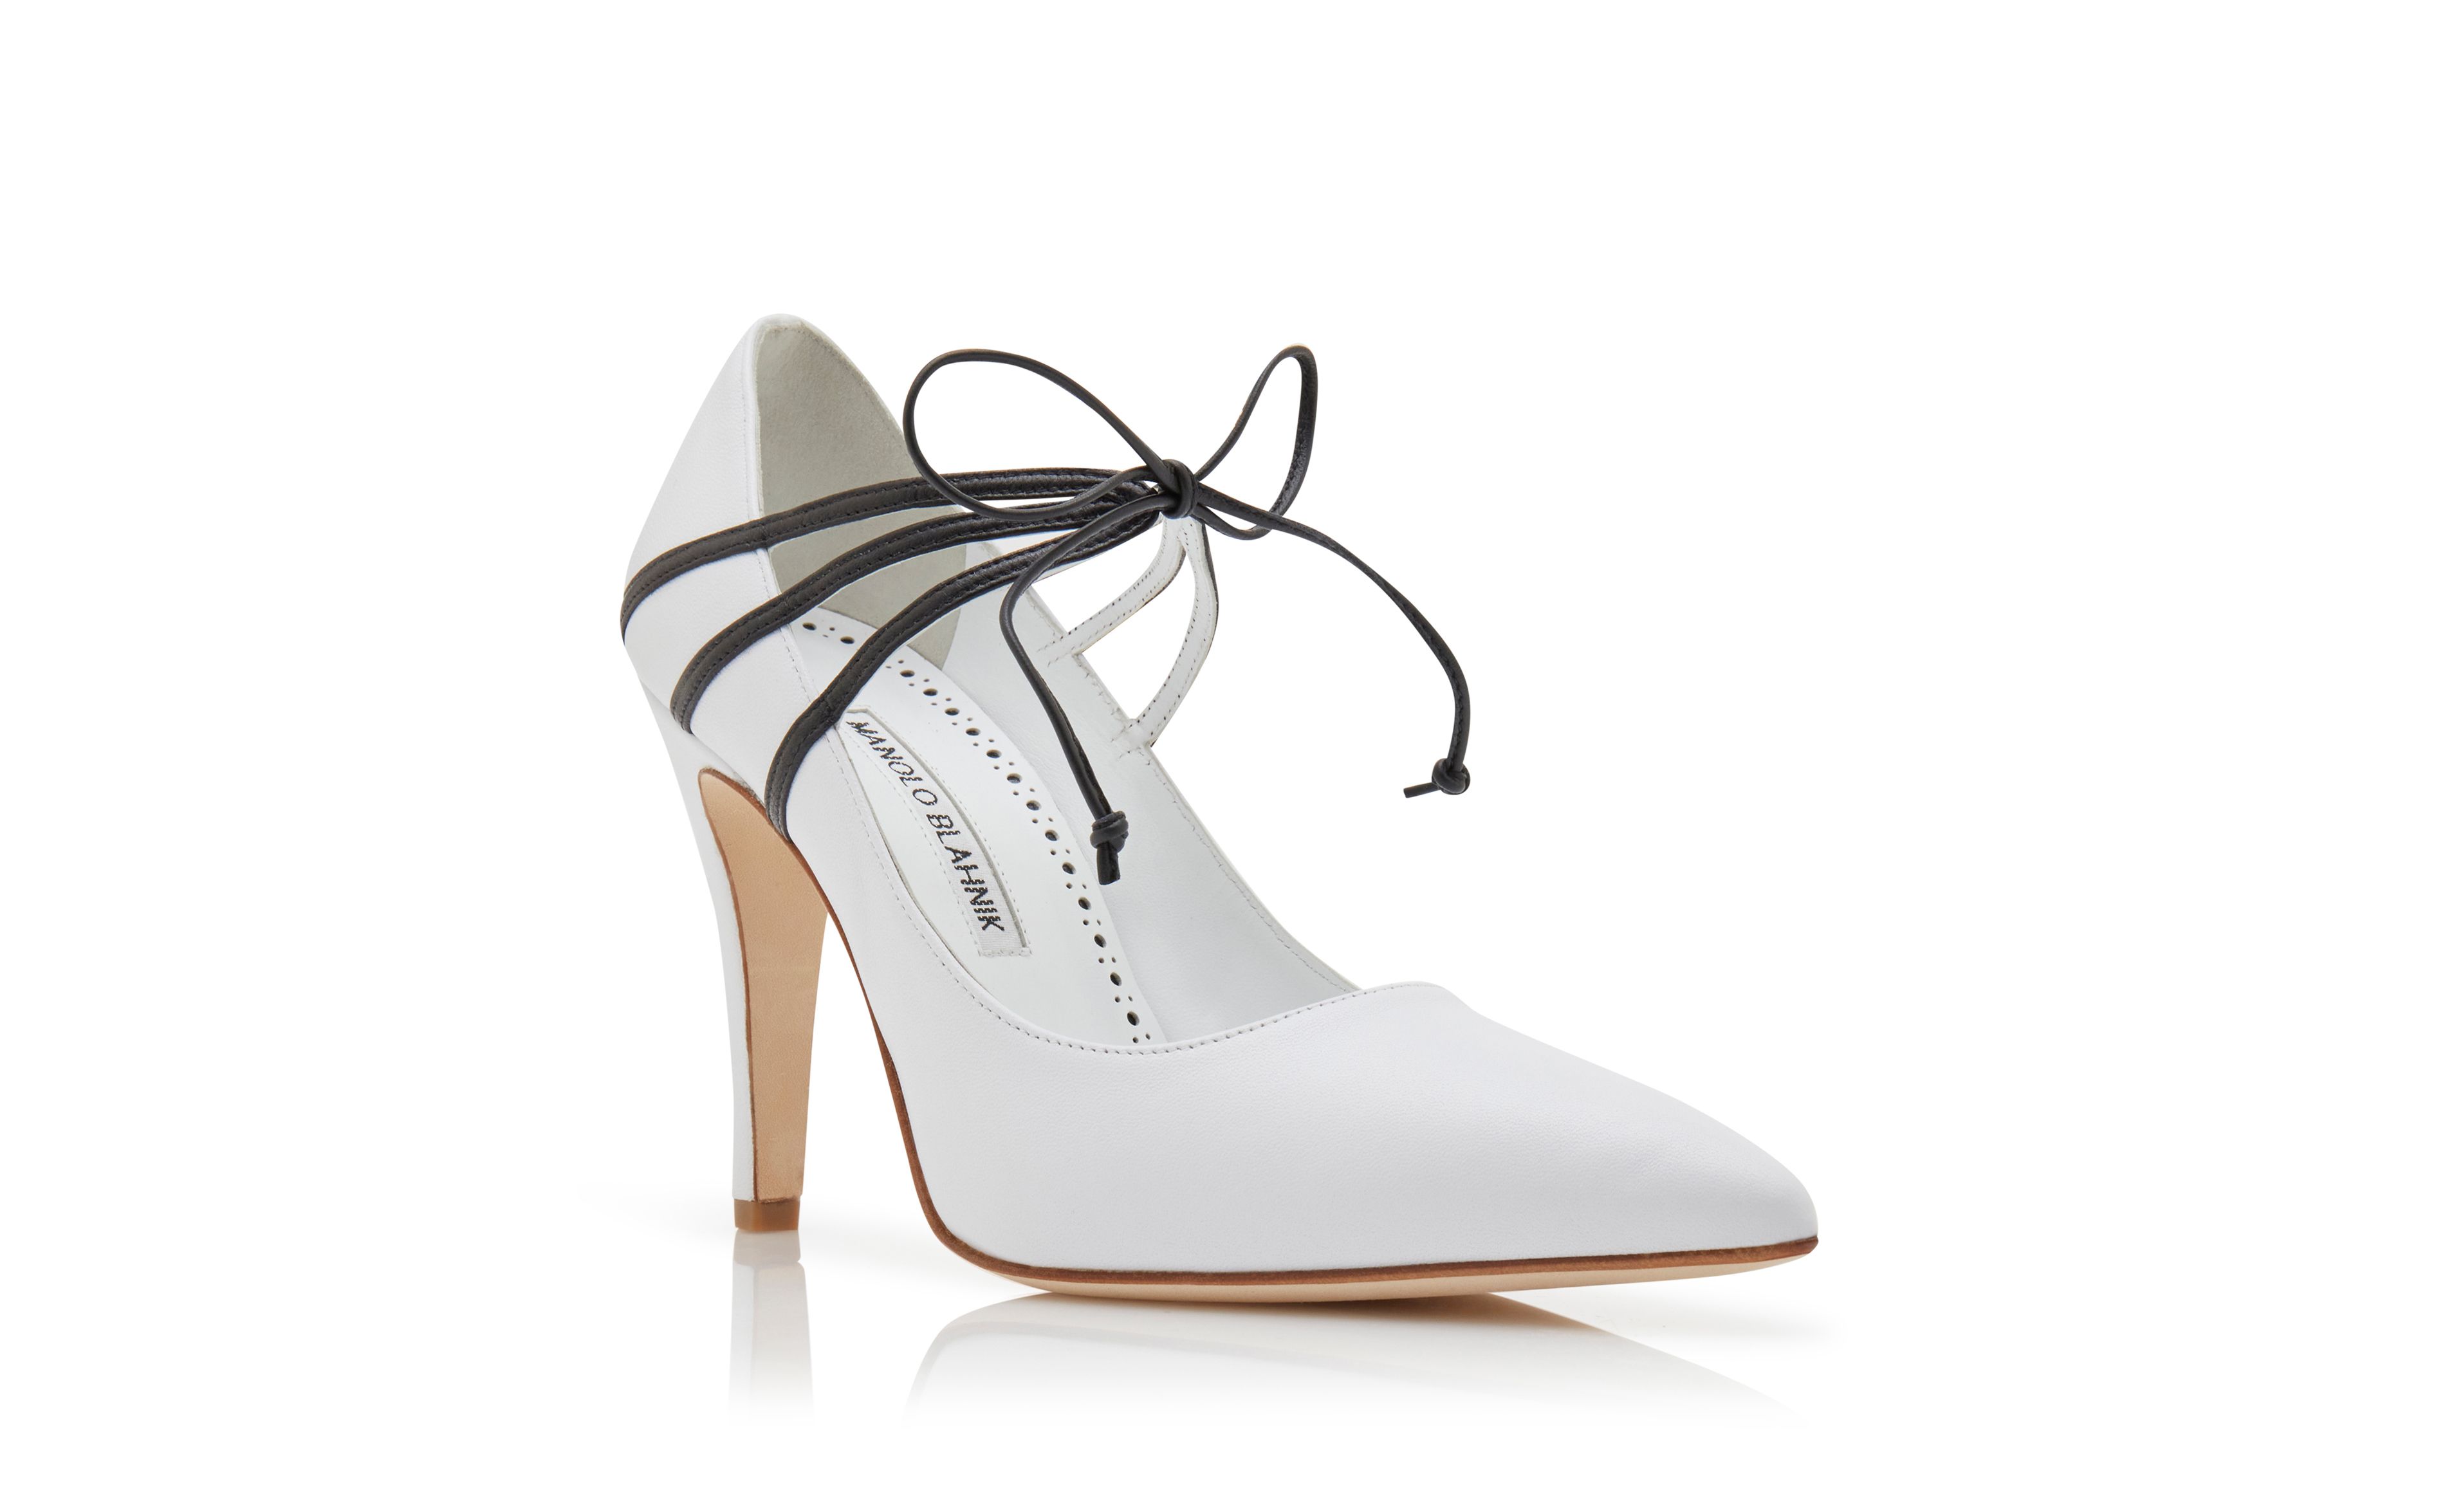 Designer White and Black Nappa Leather Lace-Up Pumps - Image Upsell